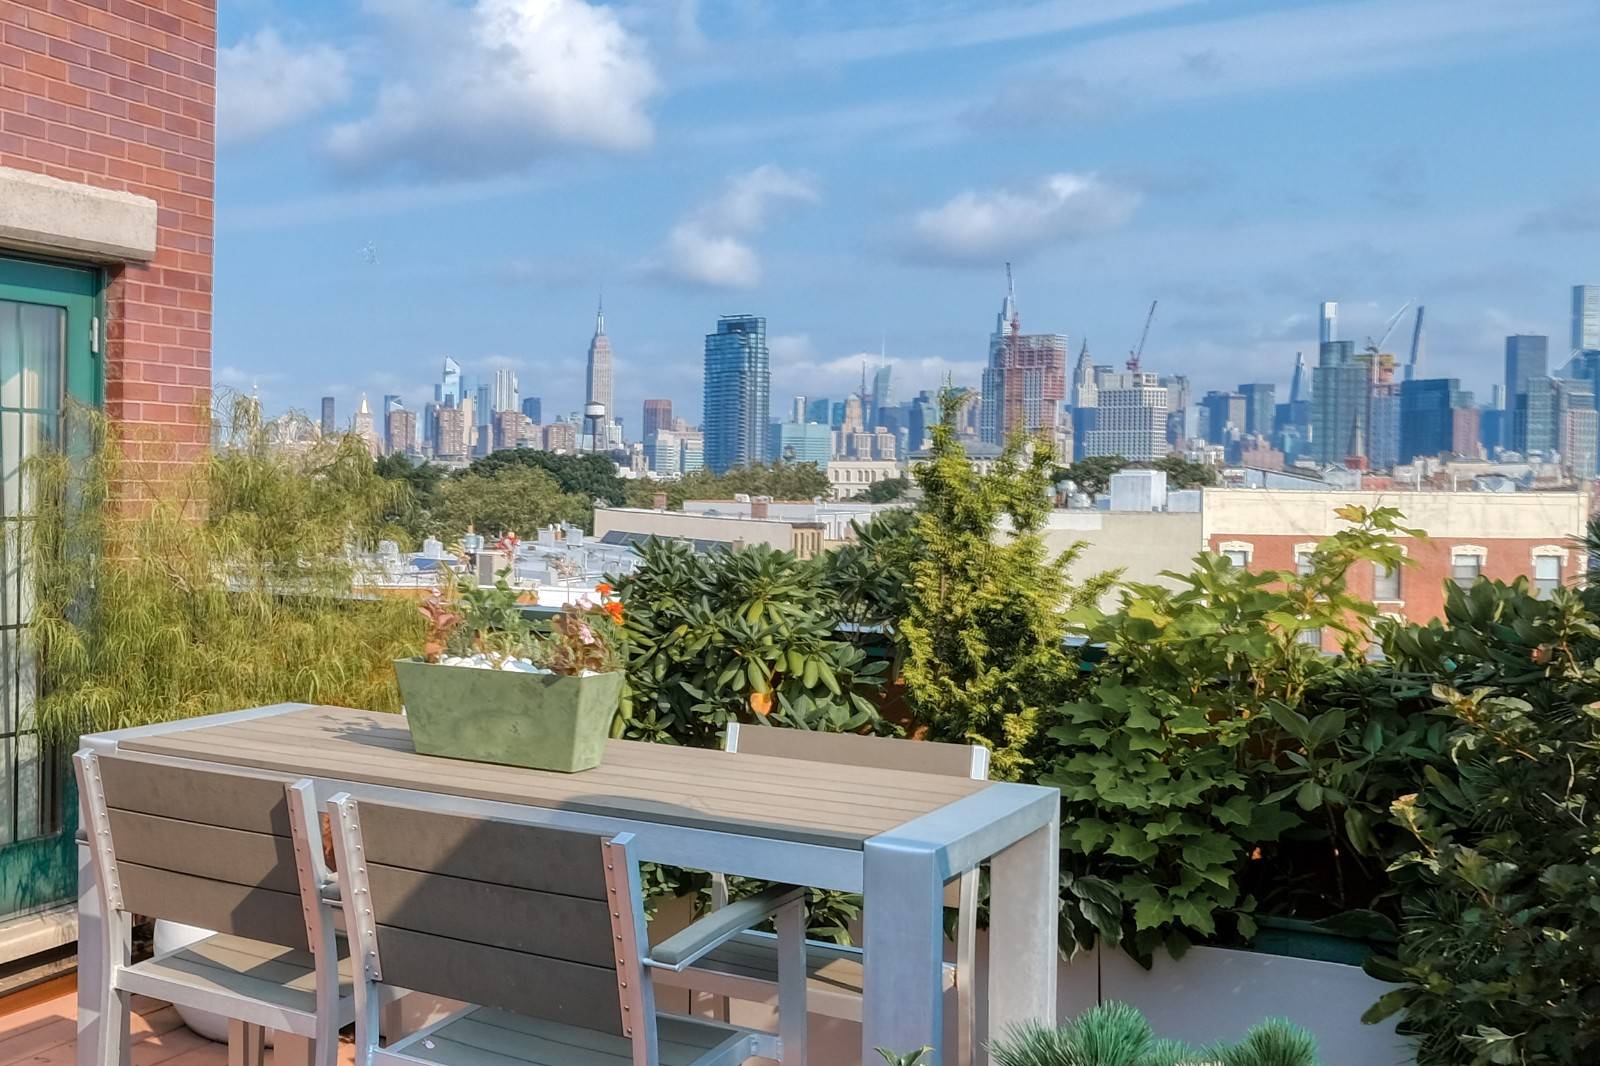 Greenpoint at its finest might be an understatement at the Eco Belvedere.